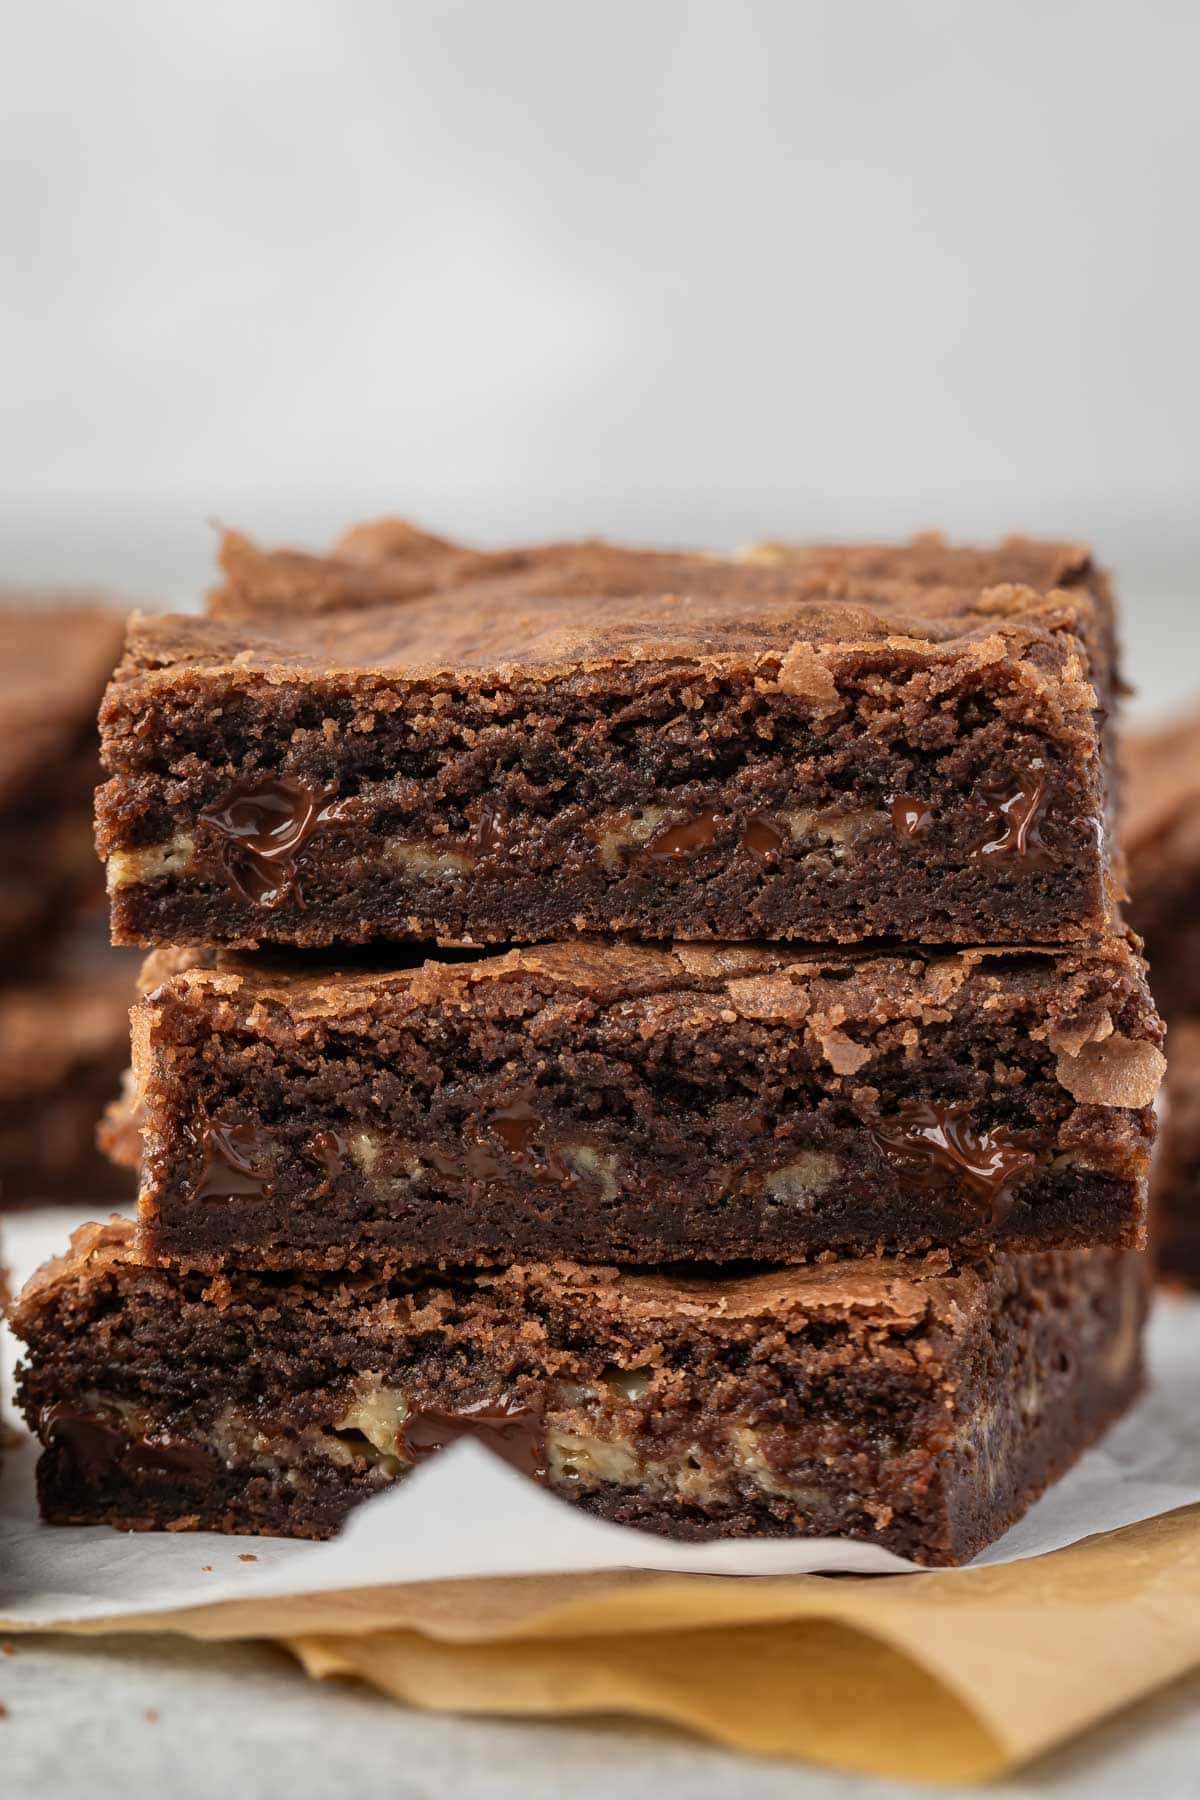 stacked brownies with chocolate chips baked in.